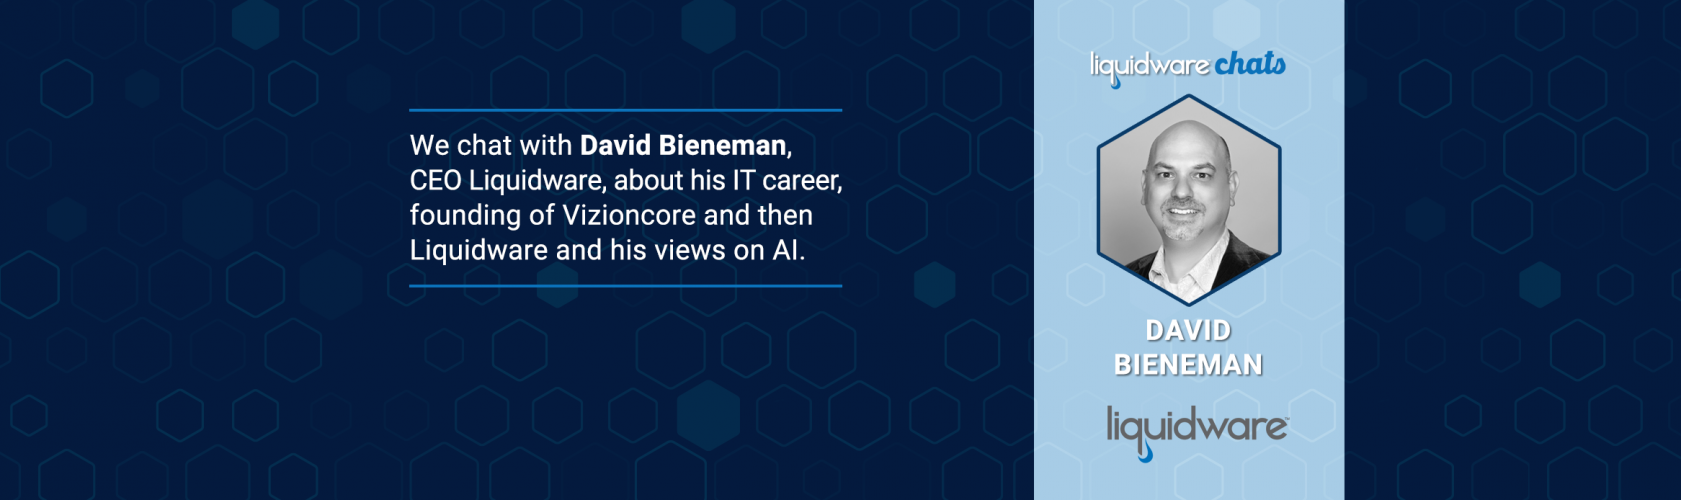 Liquidware Chats Podcast — David Bieneman — Insights from the CEO